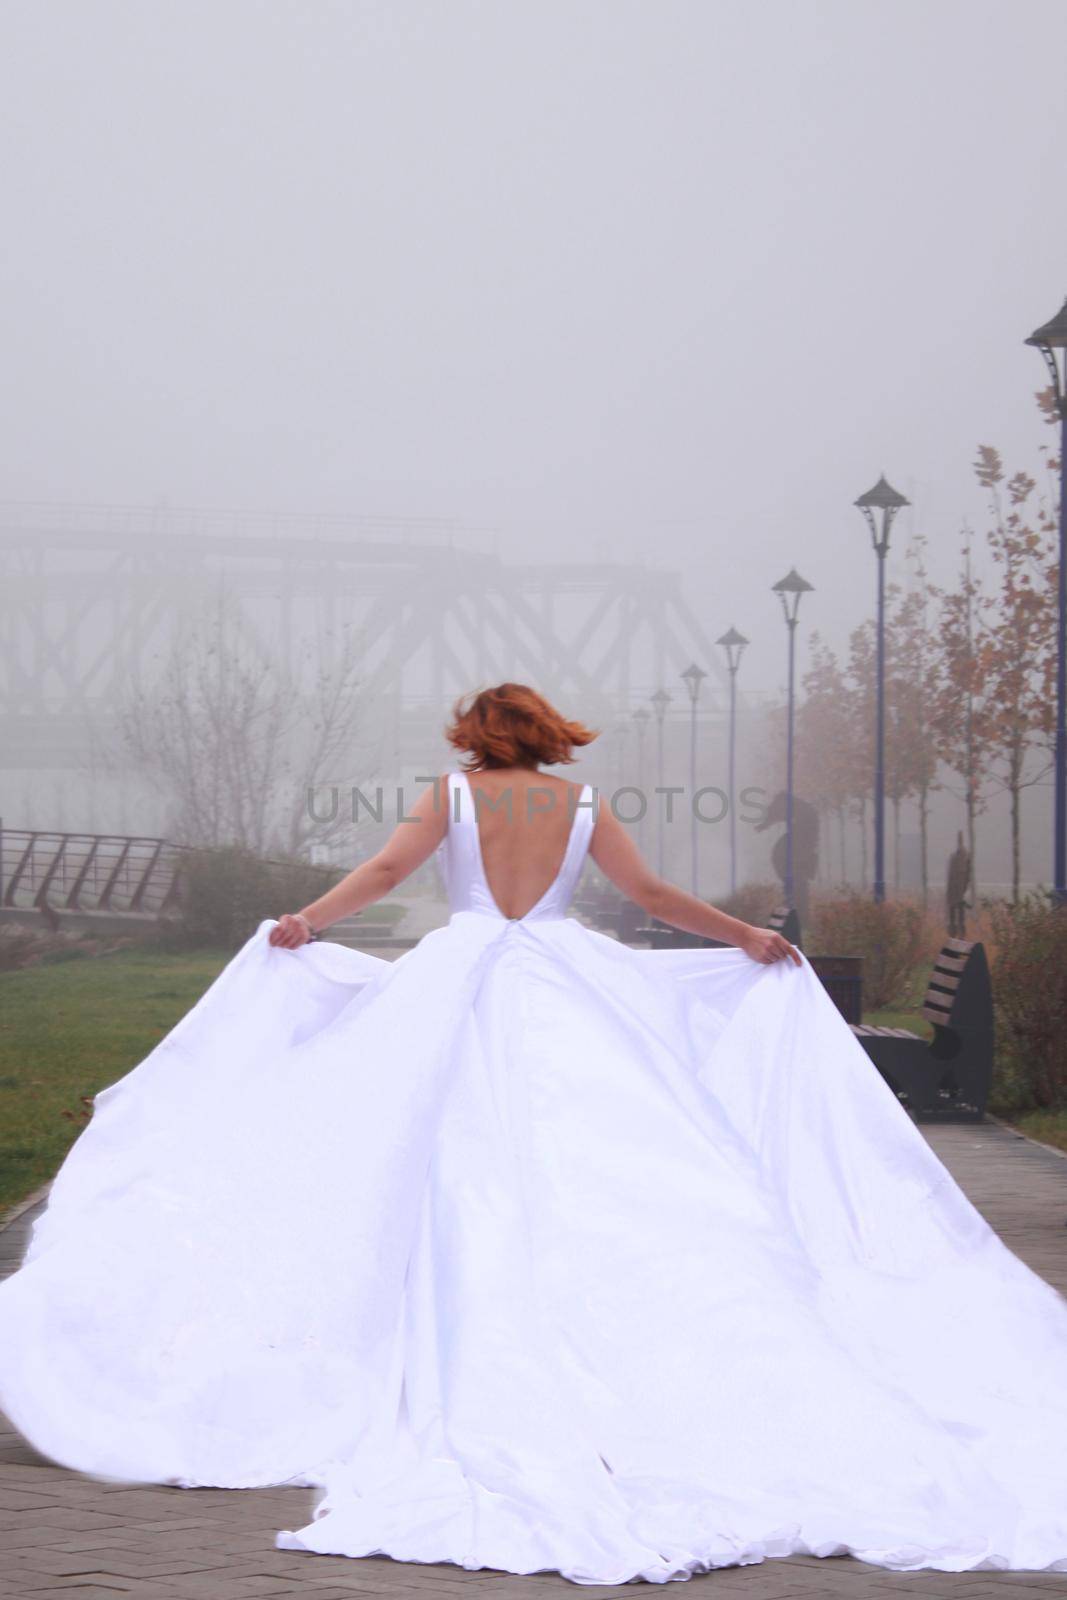 A redhead women in a white dress. A bride. Running away in the park